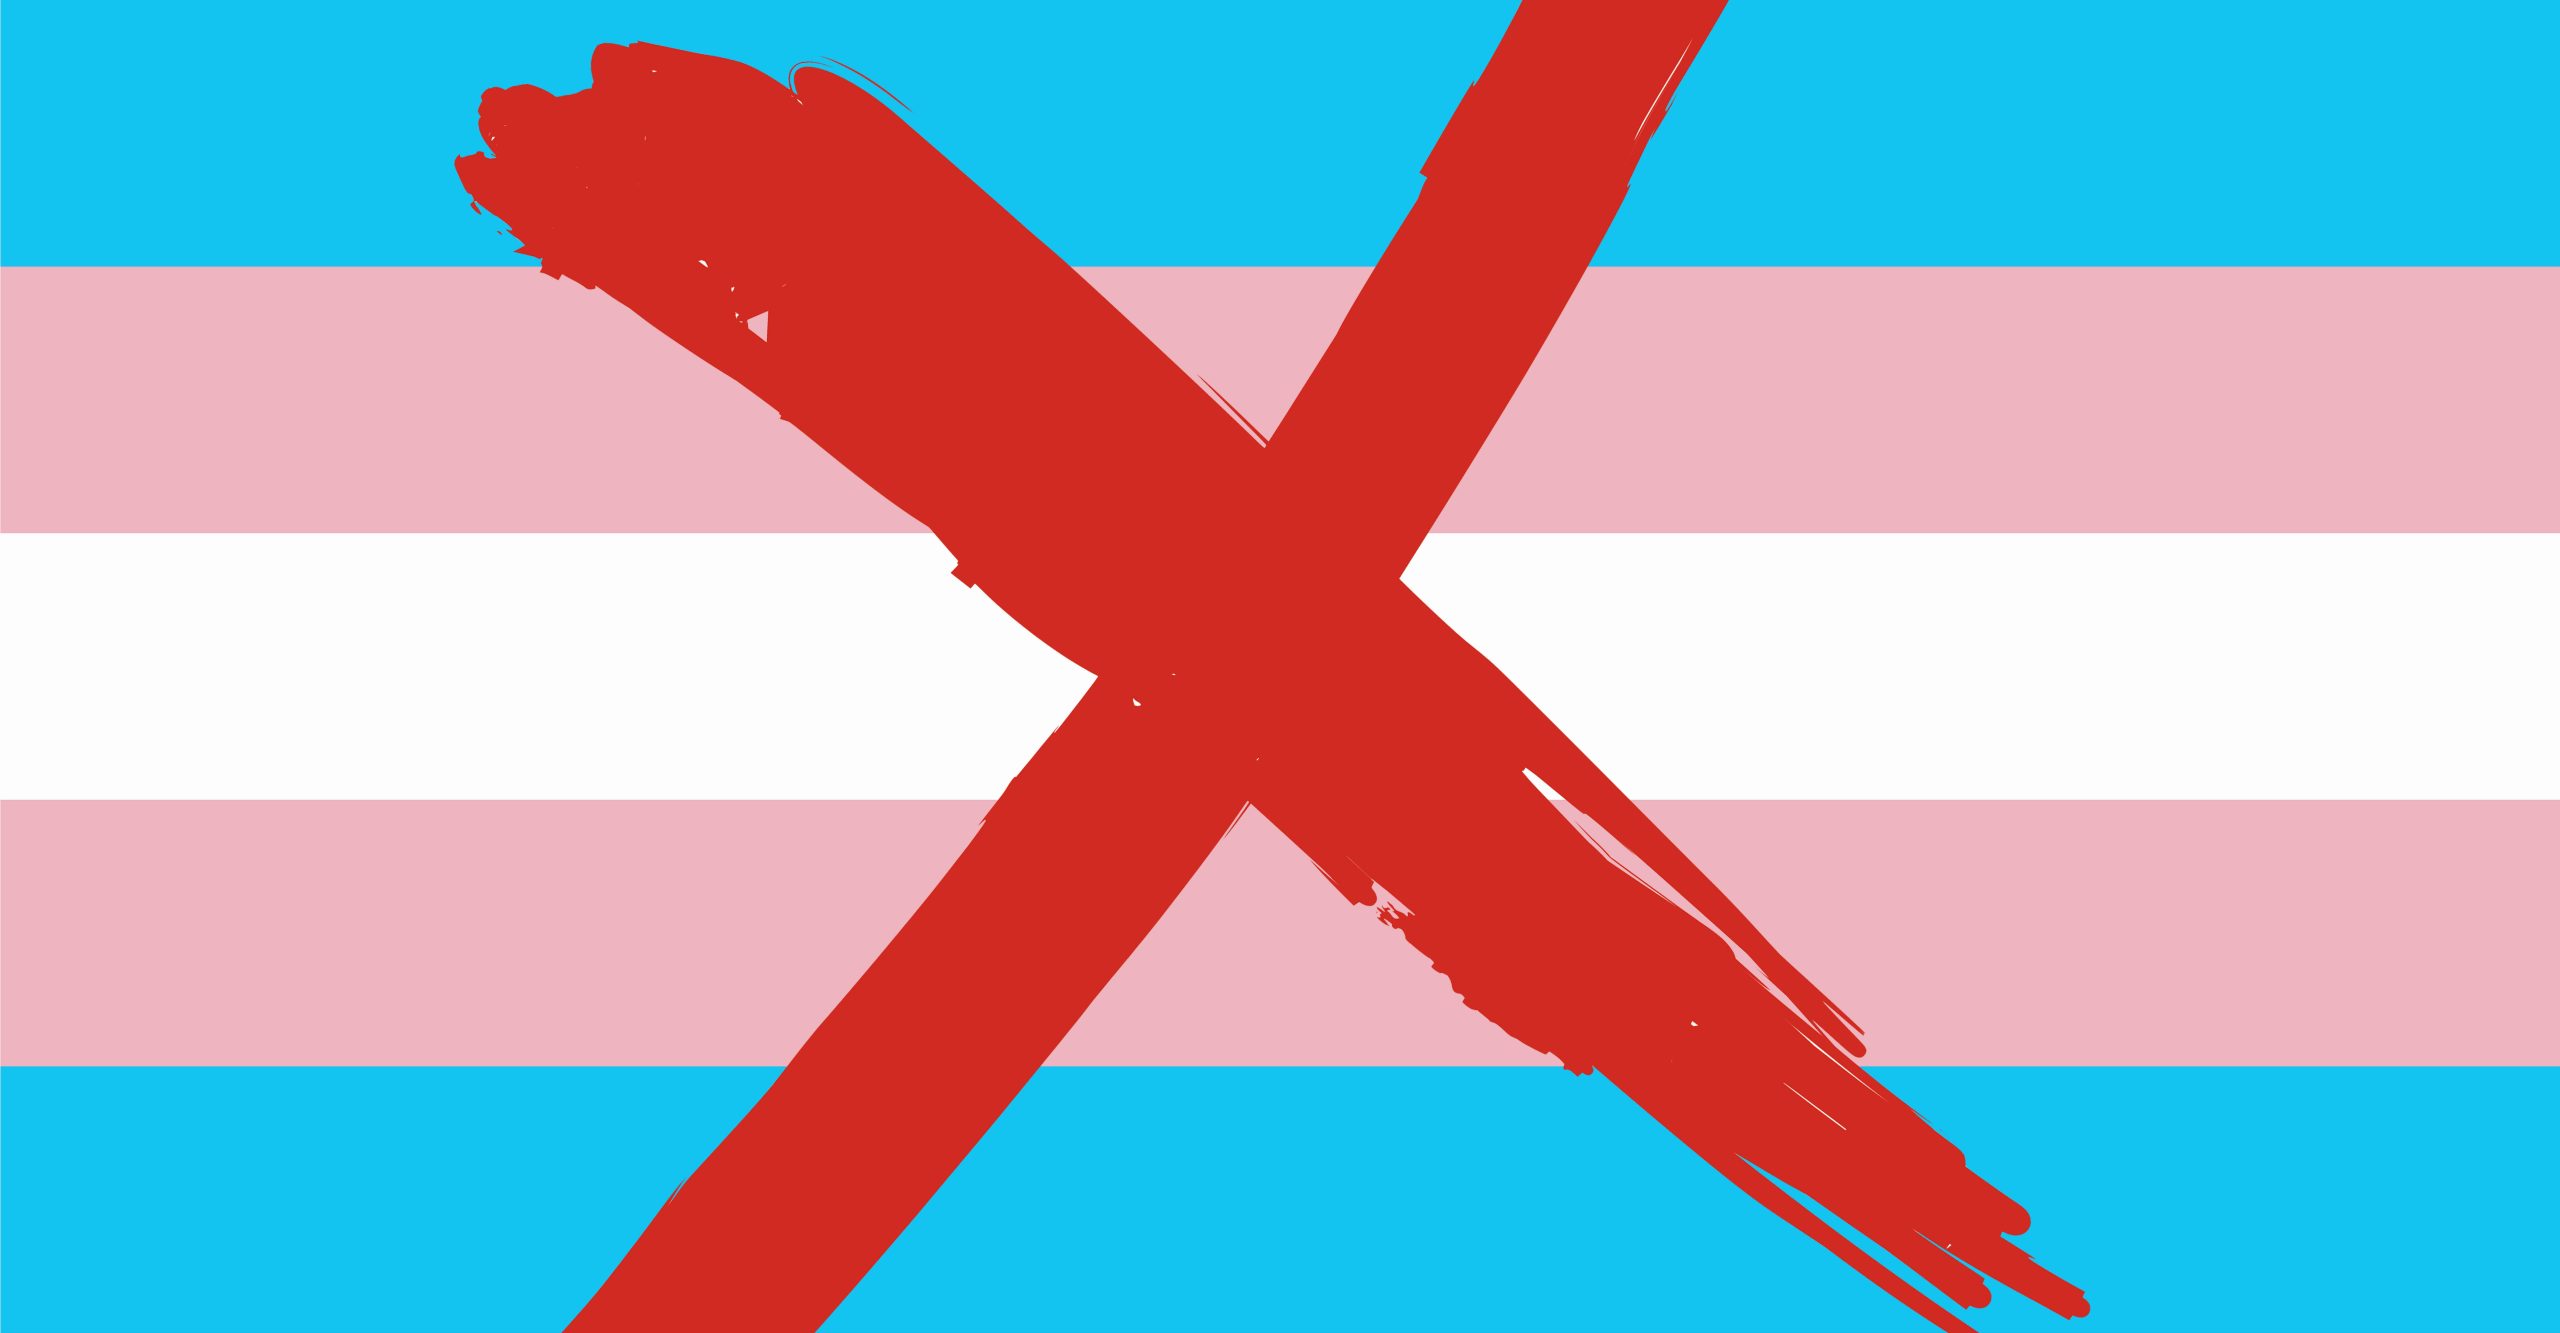 Trans flag crossed out